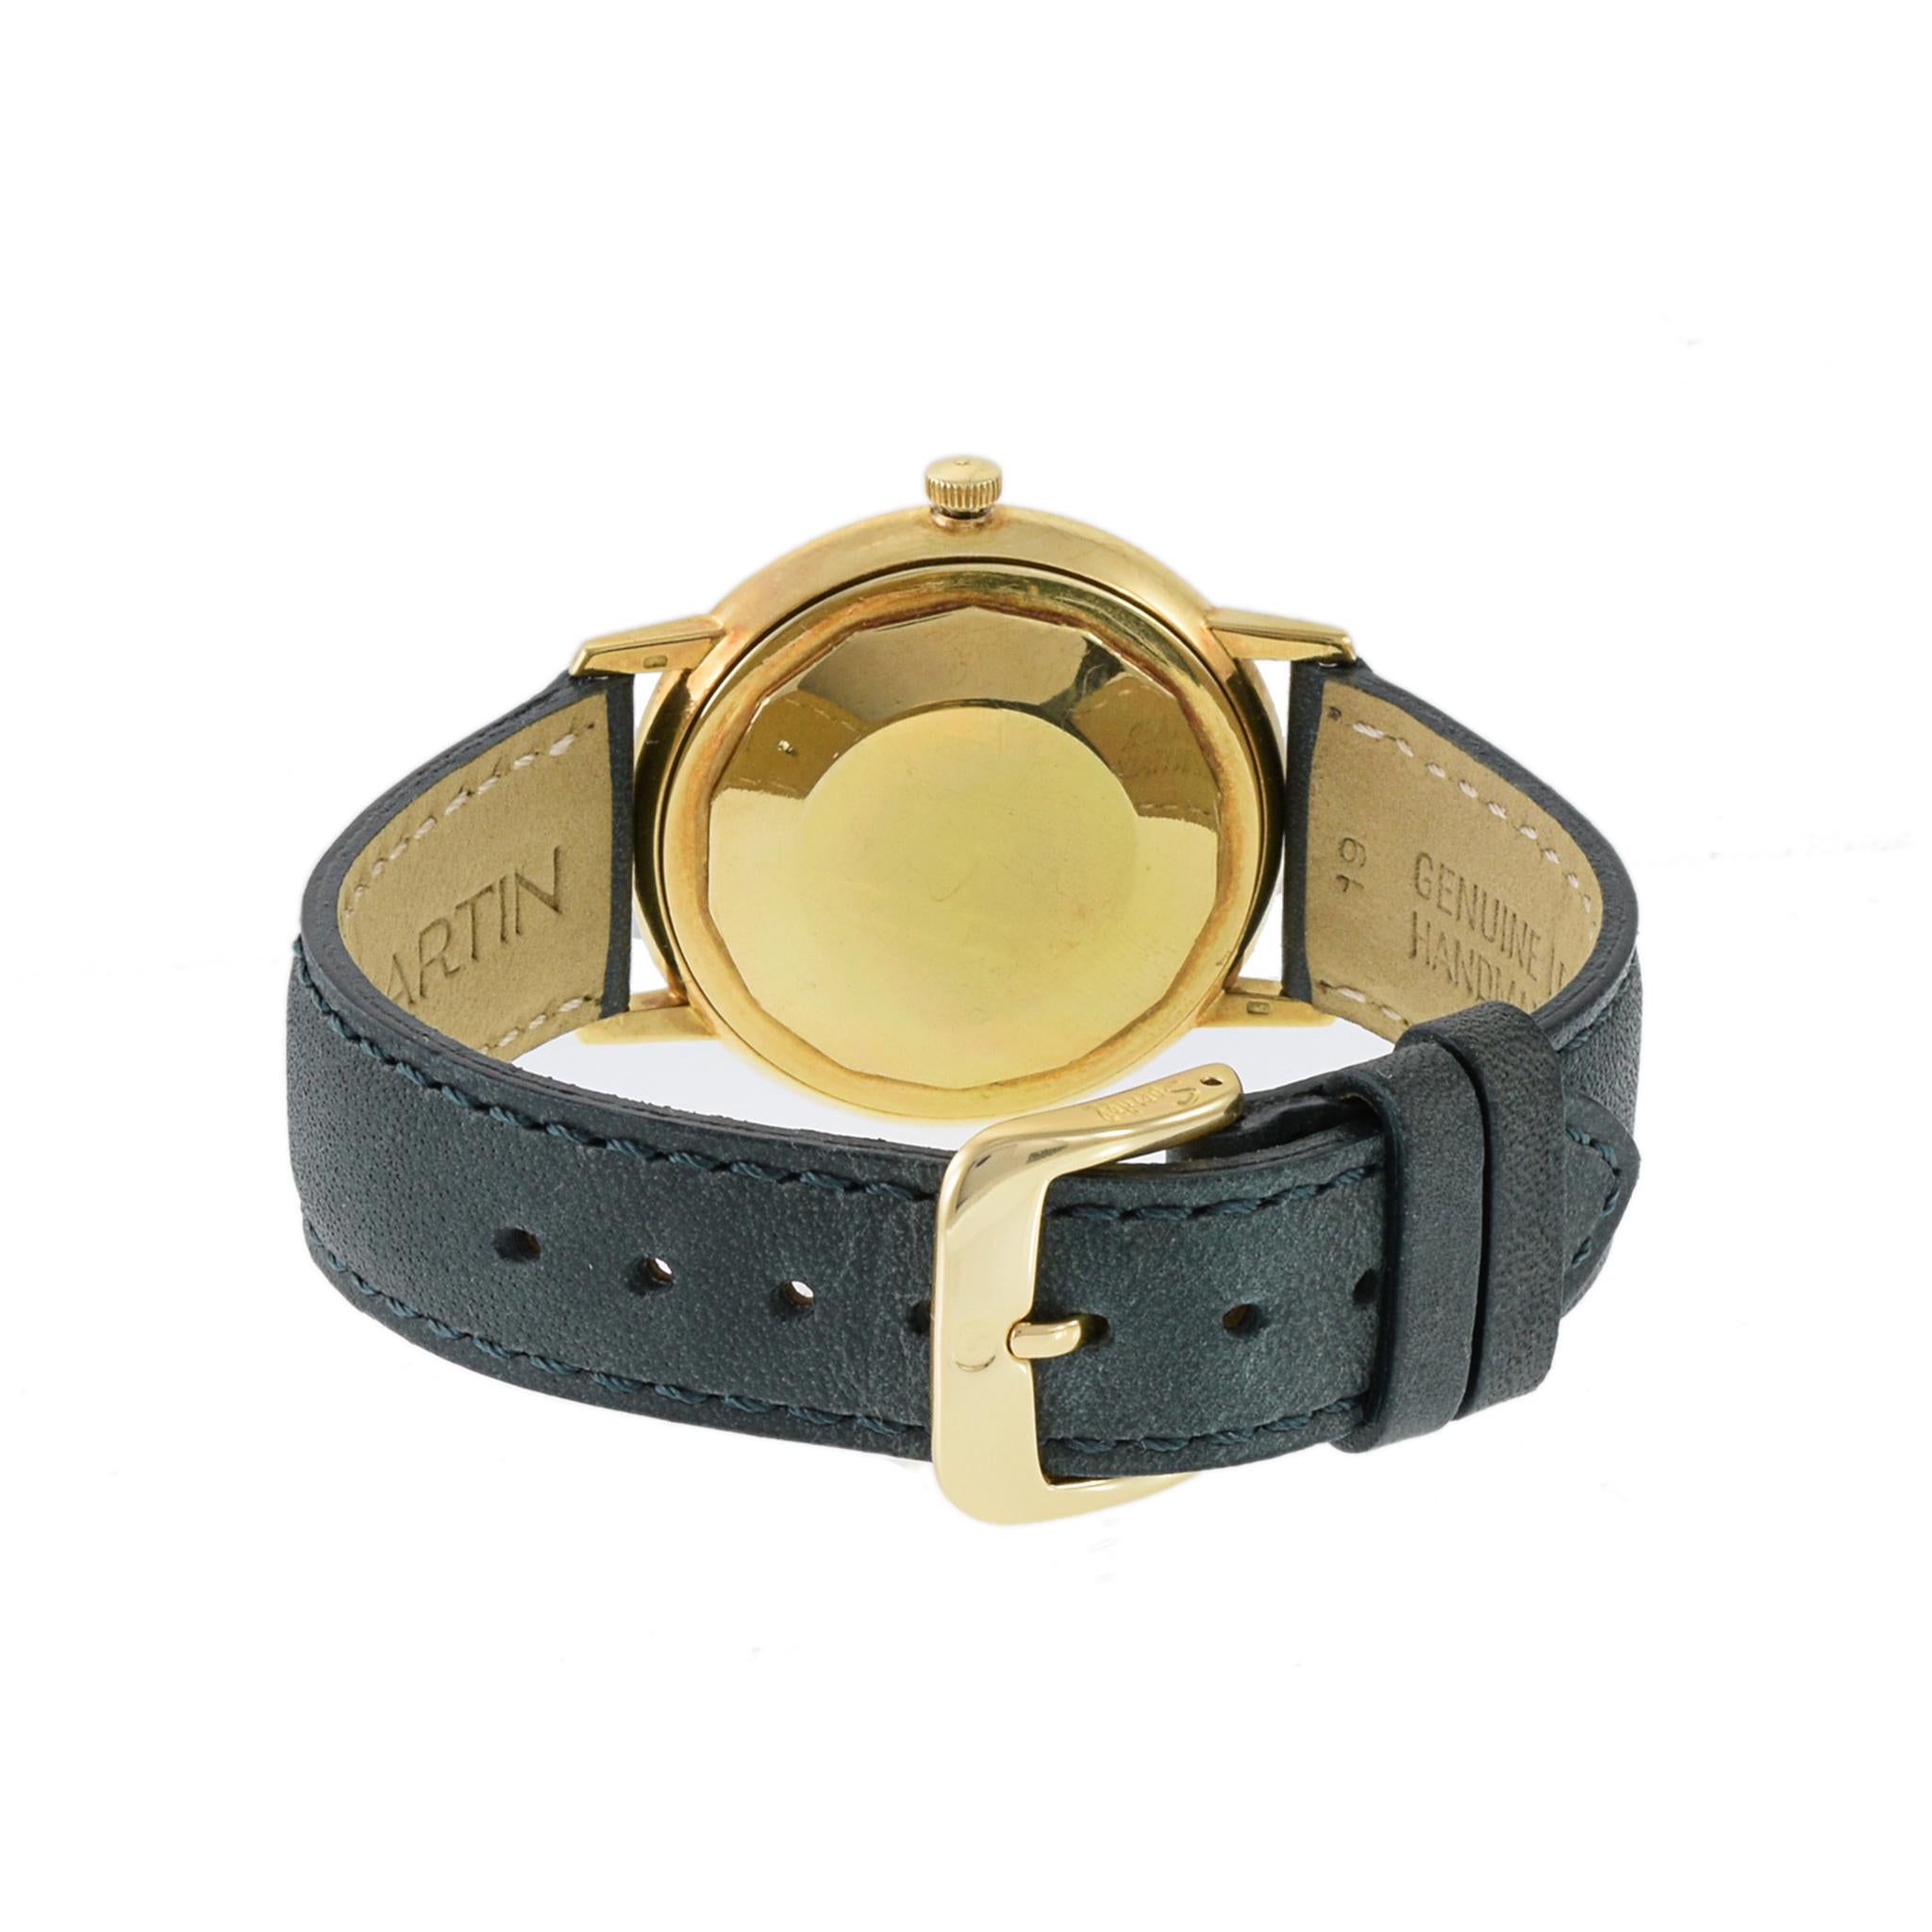 Gubelin Ipso Matic 18K Yellow Gold Automatic Watch In Good Condition For Sale In New York, NY